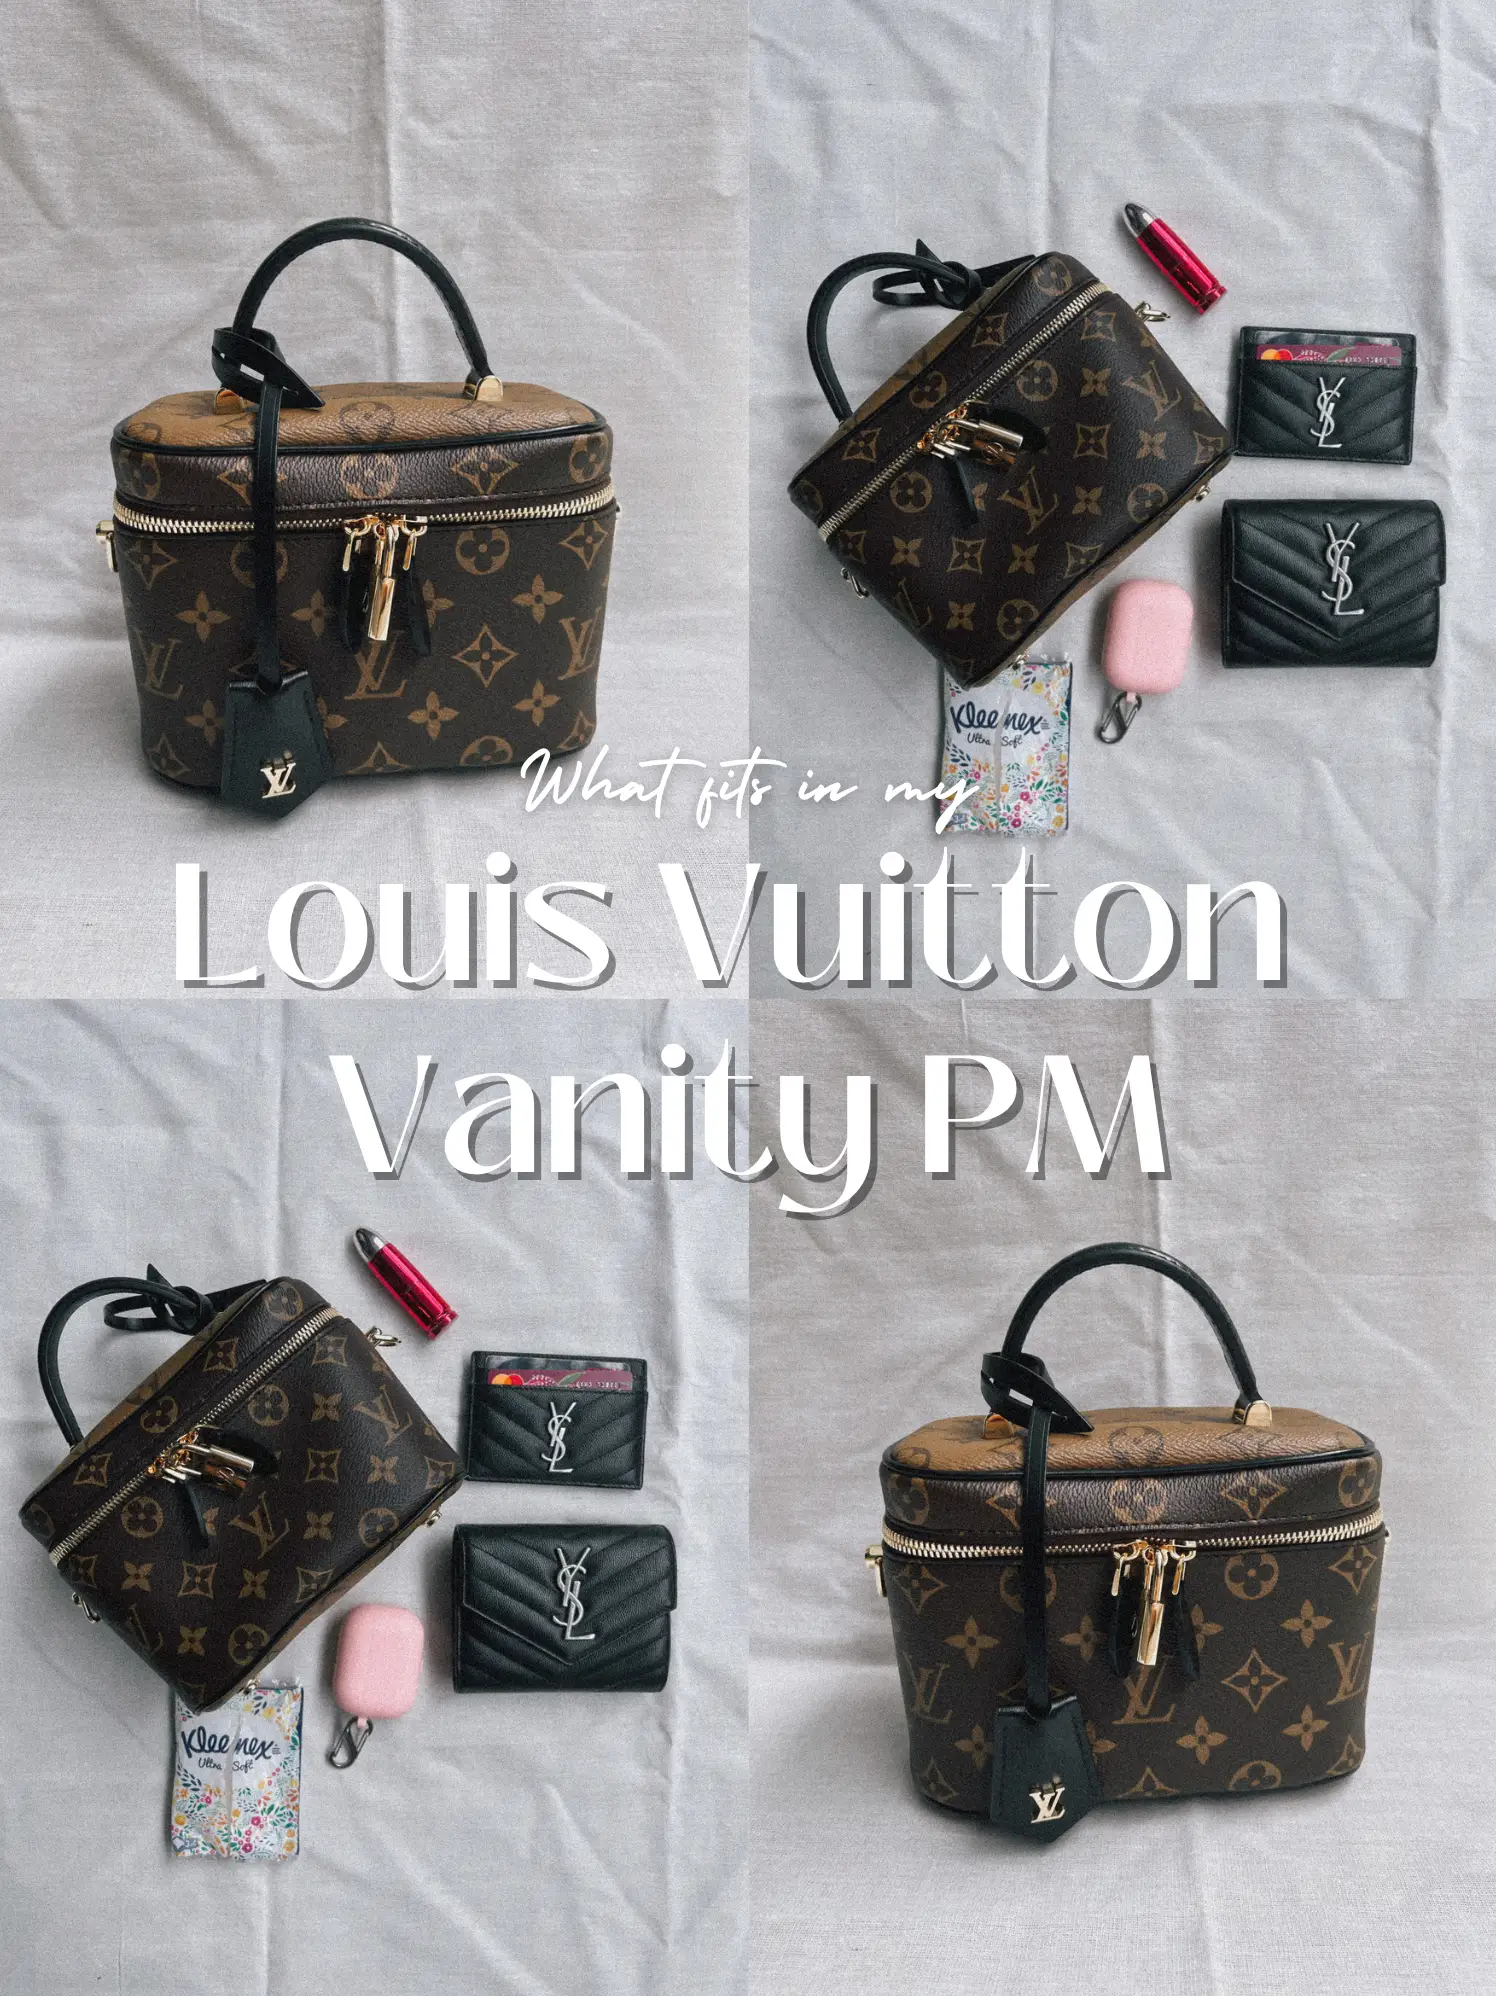 A sign to get Vanity bags! 💕  Gallery posted by 𝓘𝓼𝓪𝓫𝓮𝓵